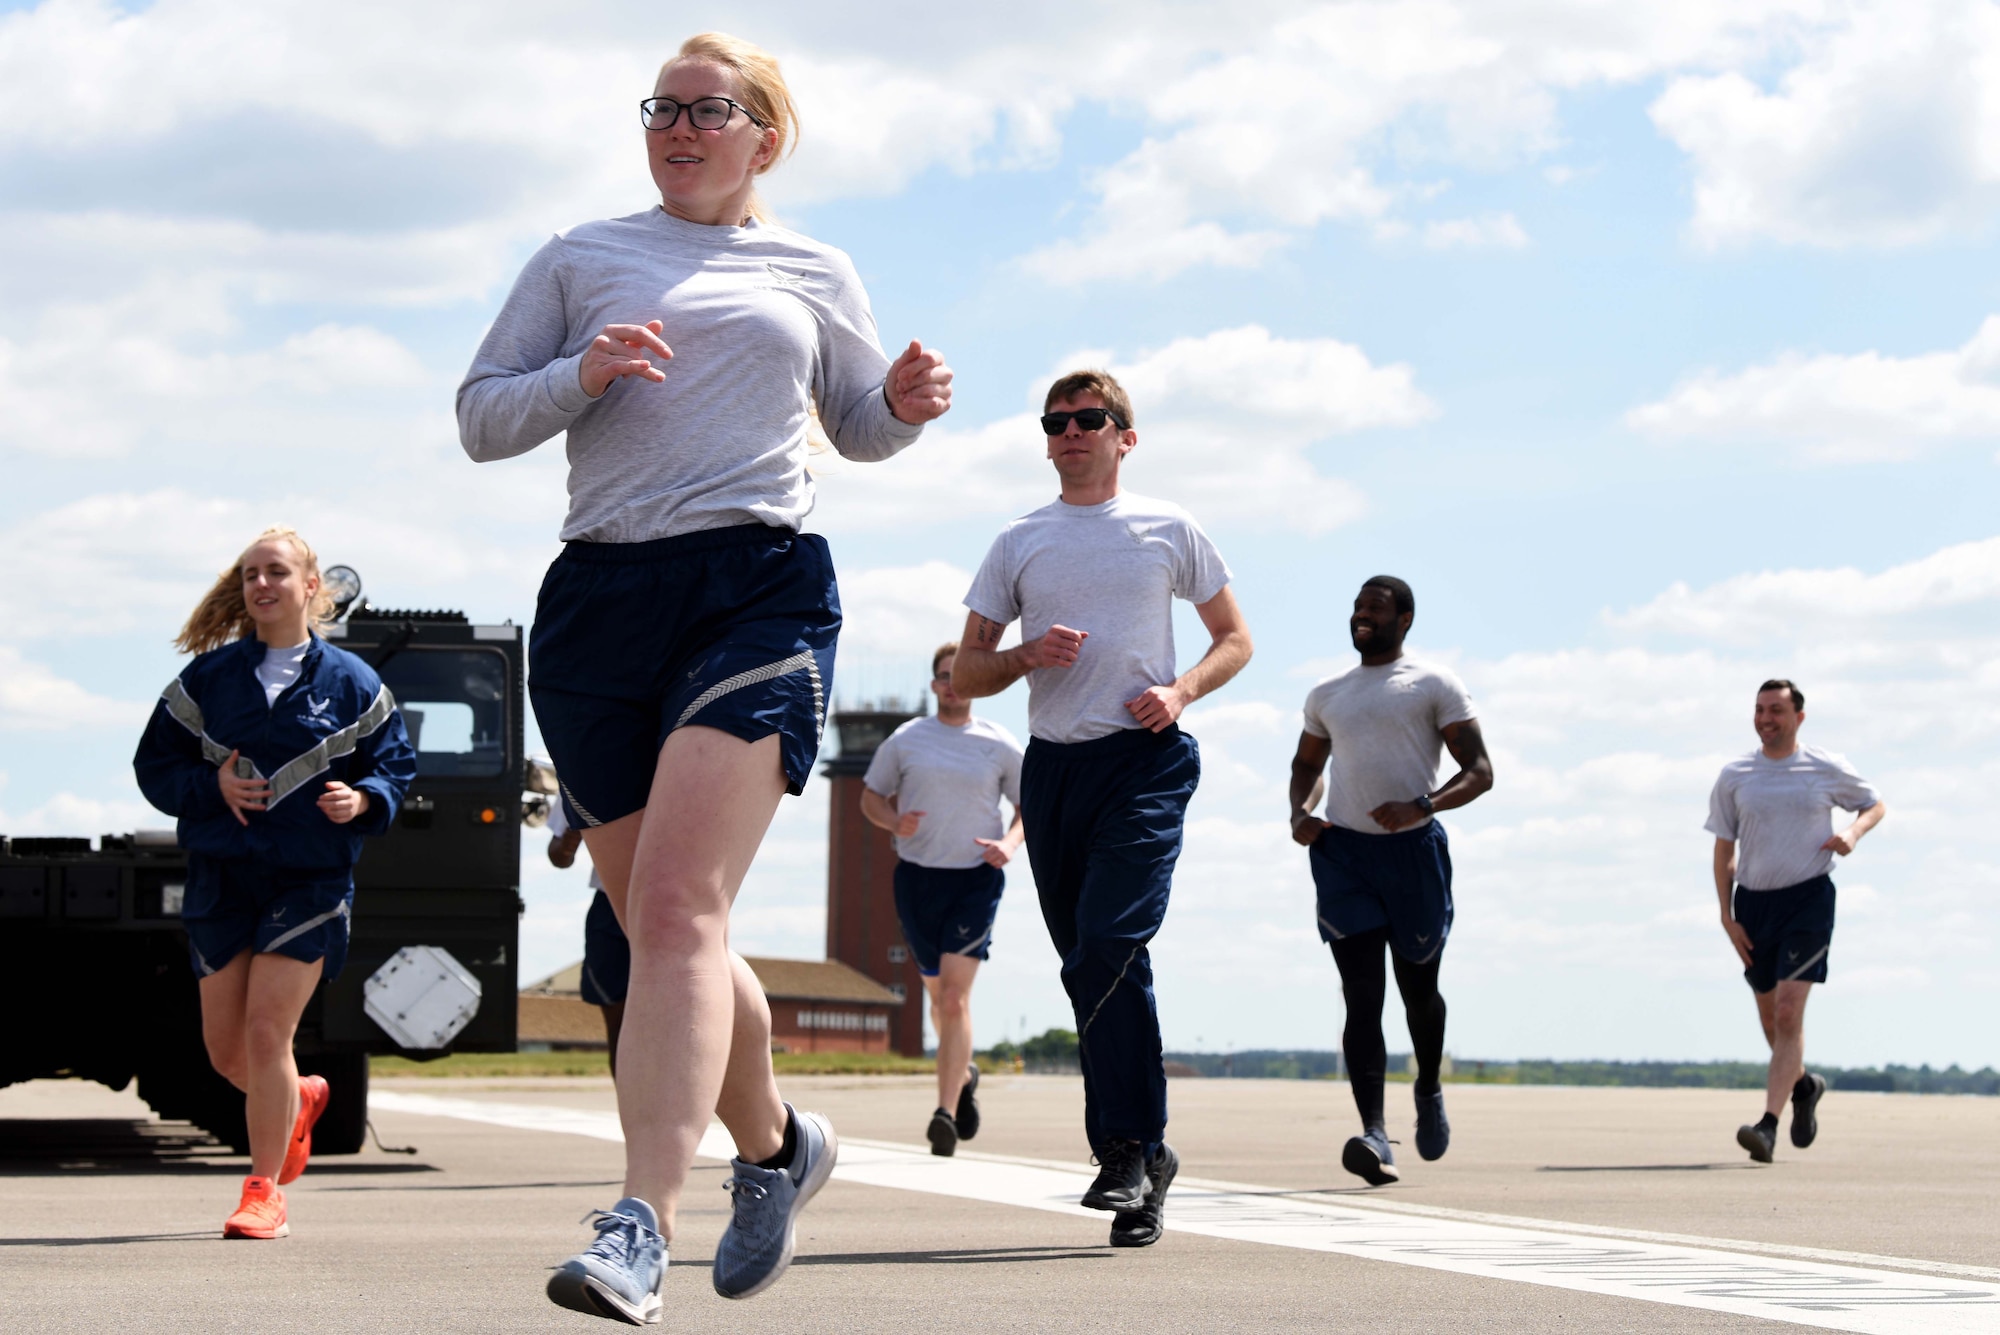 Airmen from the 727th Air Mobility Squadron participate in the annual Port Dawg Memorial Run at RAF Mildenhall, England, May 15, 2020. The Port Dawg Memorial Run is an annual event that is career field-wide for air transportation Airmen and is held at aerial ports around the world during Transportation Week. (U.S. Air Force photo by Senior Airman Brandon Esau)